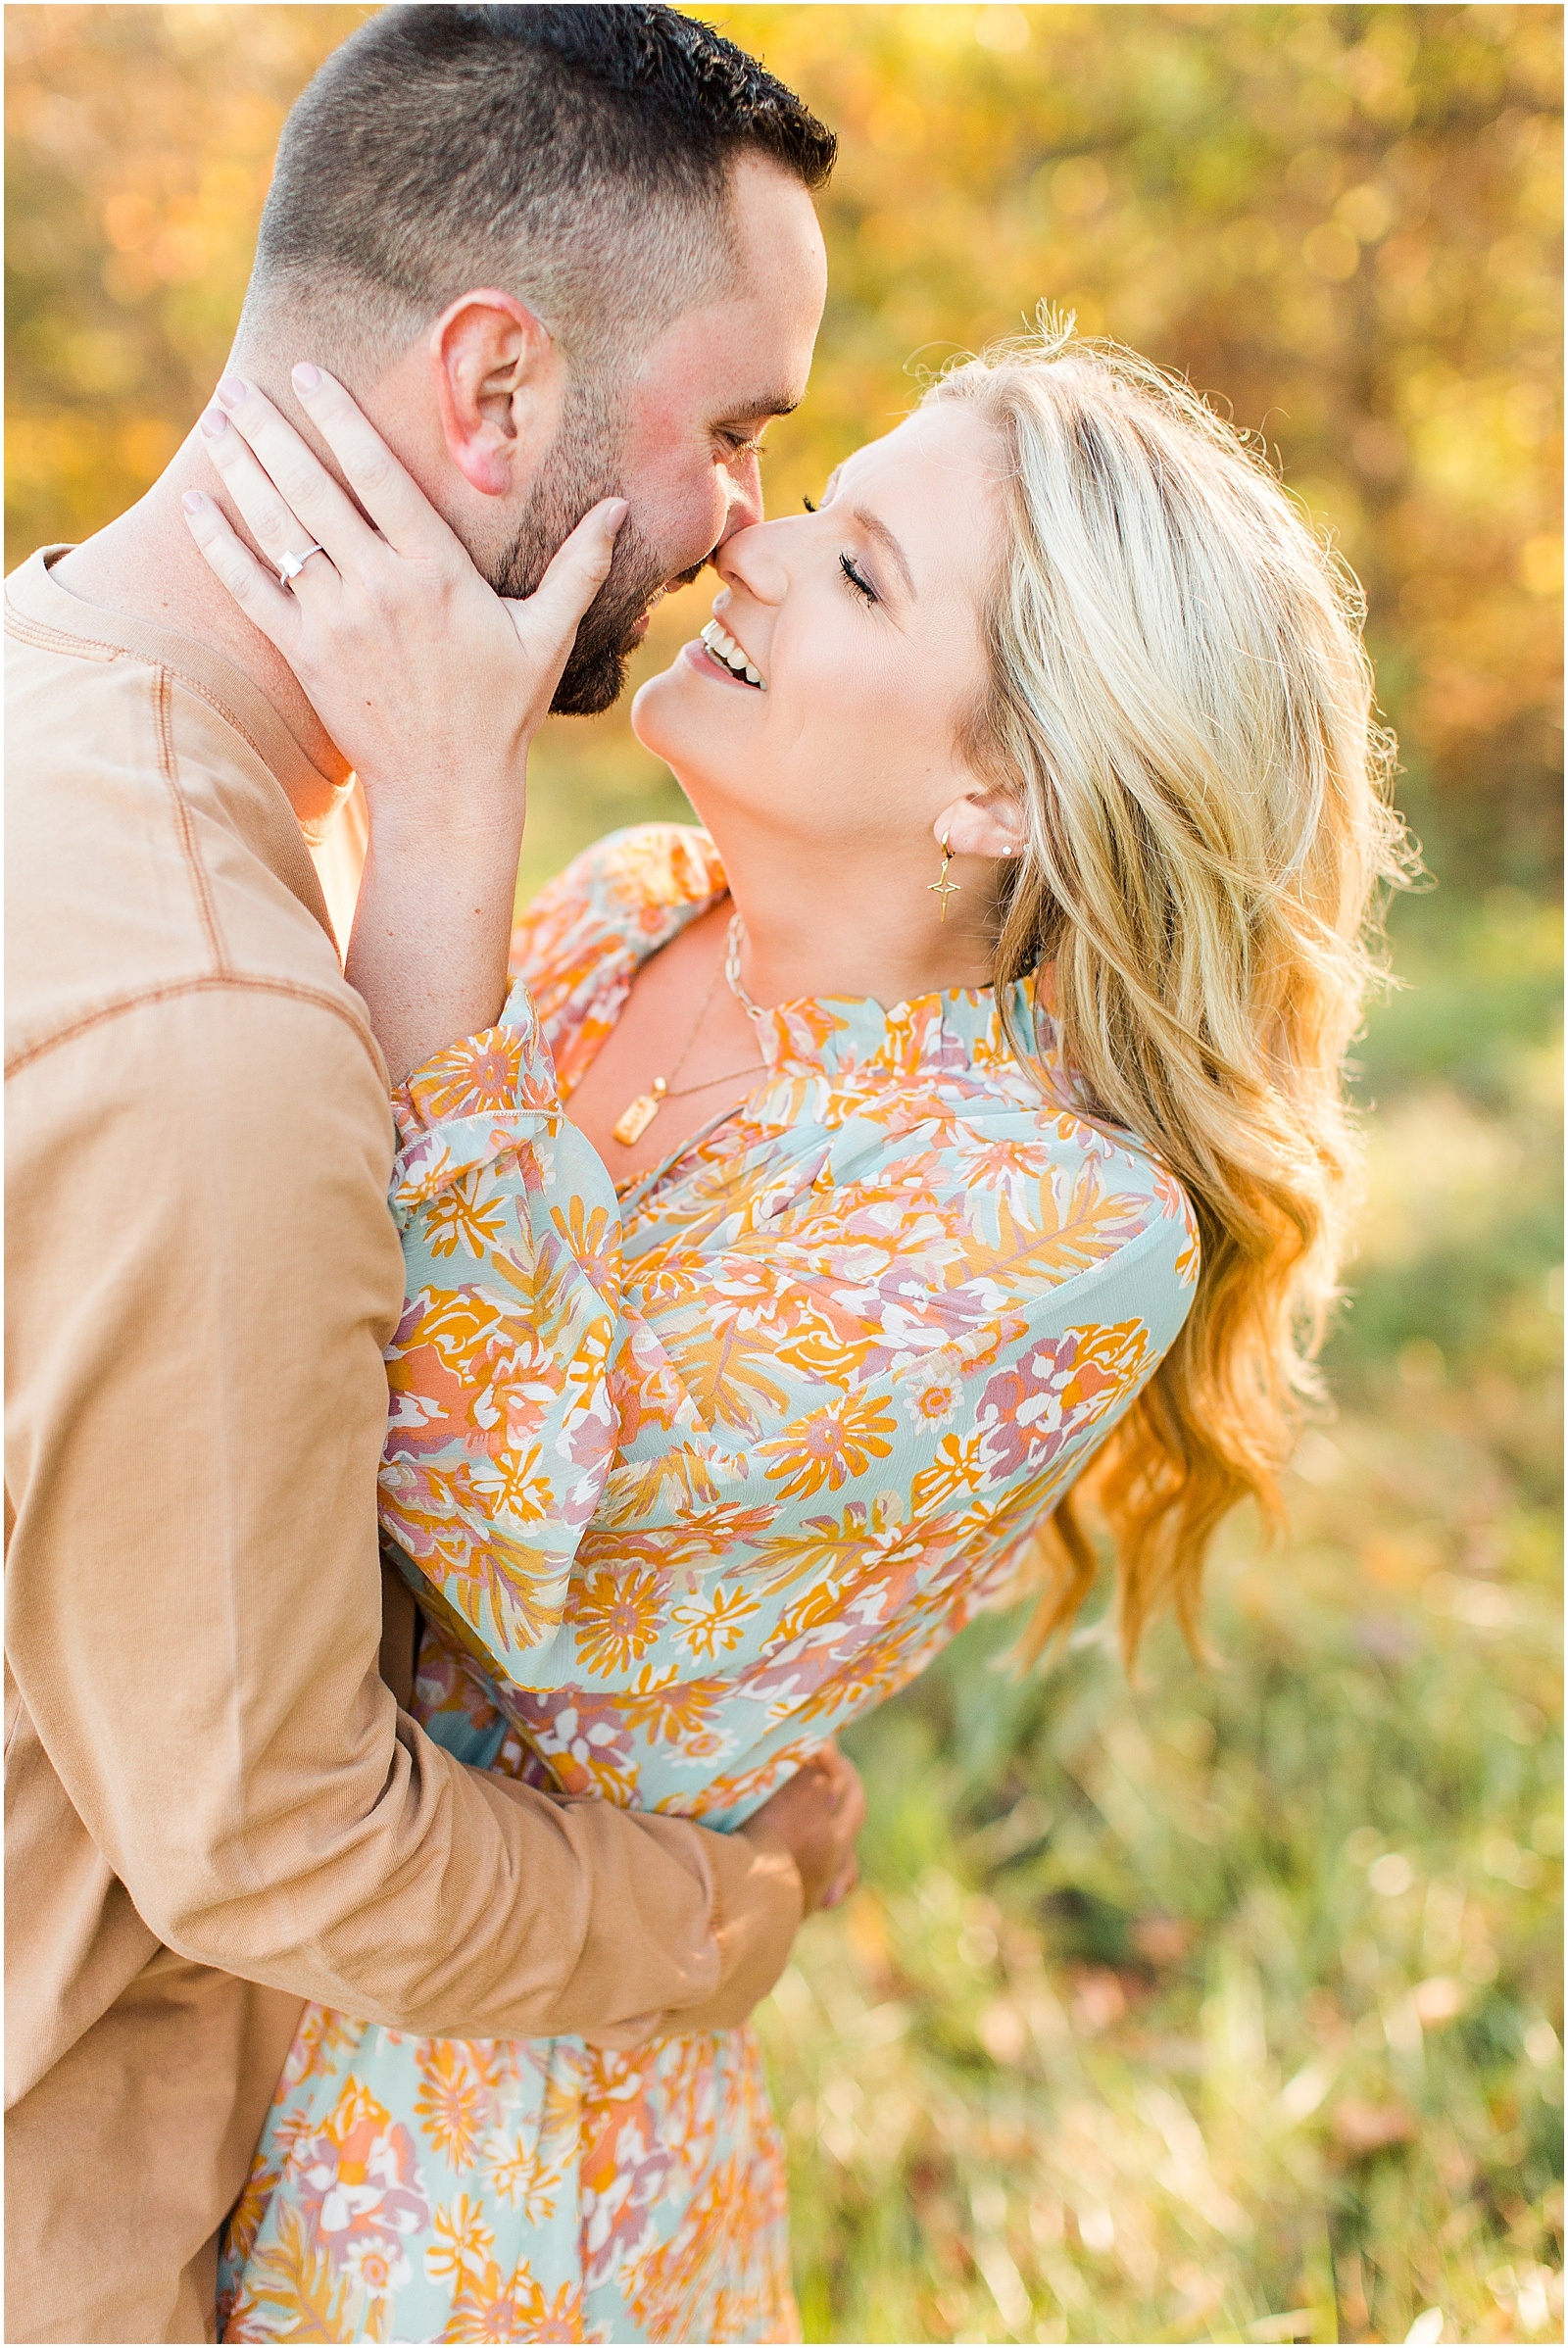 A Southern Indiana Engagement Session | Charleston and Erin | Bret and Brandie Photography005.jpg